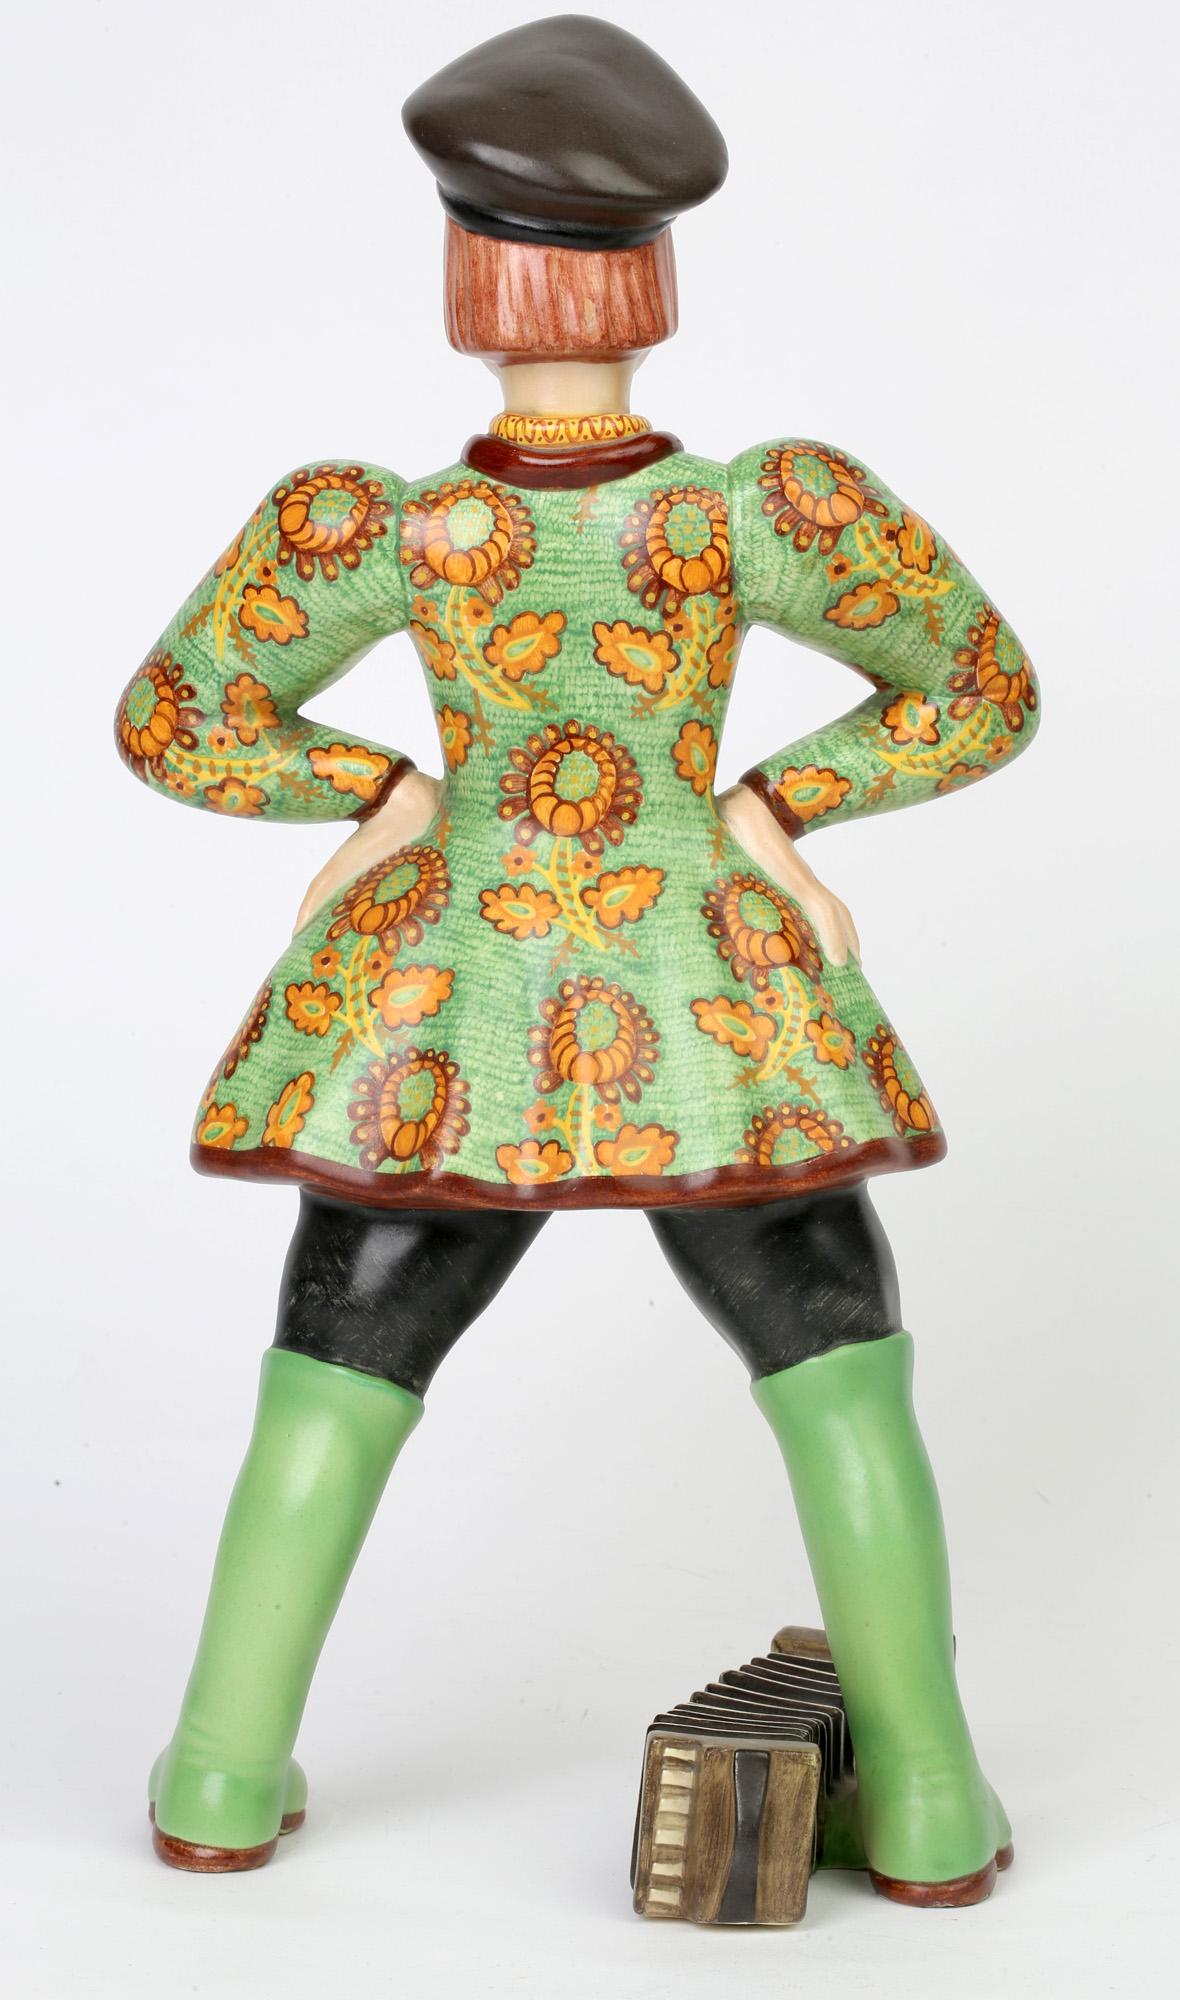 Lenci Art Deco Ivan the Russian Boy Pottery Figure by Elena Scavini In Good Condition For Sale In Bishop's Stortford, Hertfordshire